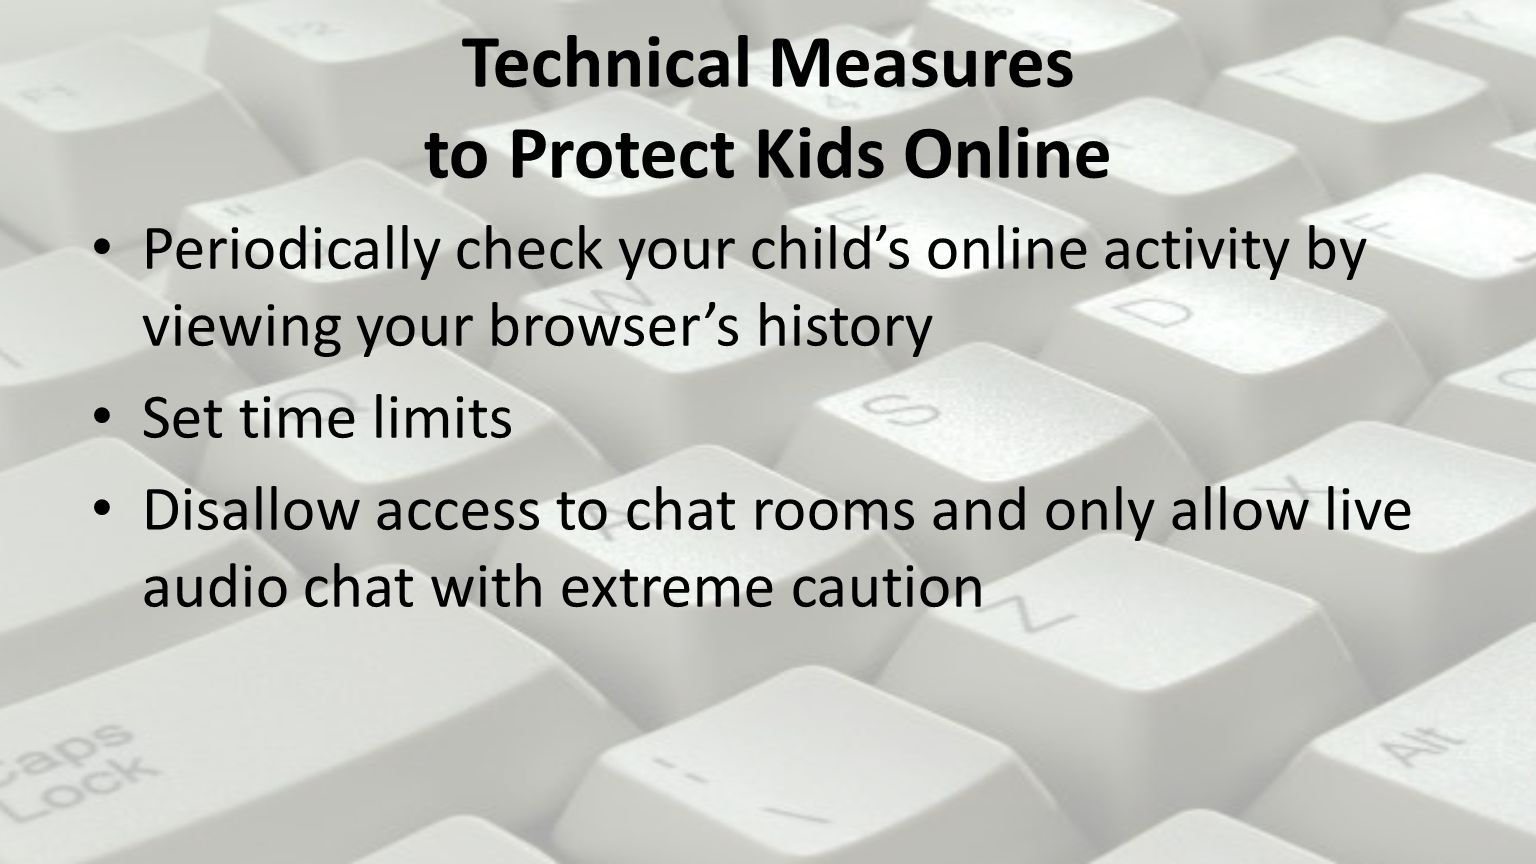 Technical Measures to Protect Kids Online Periodically check your child’s online activity by viewing your browser’s history Set time limits Disallow access to chat rooms and only allow live audio chat with extreme caution